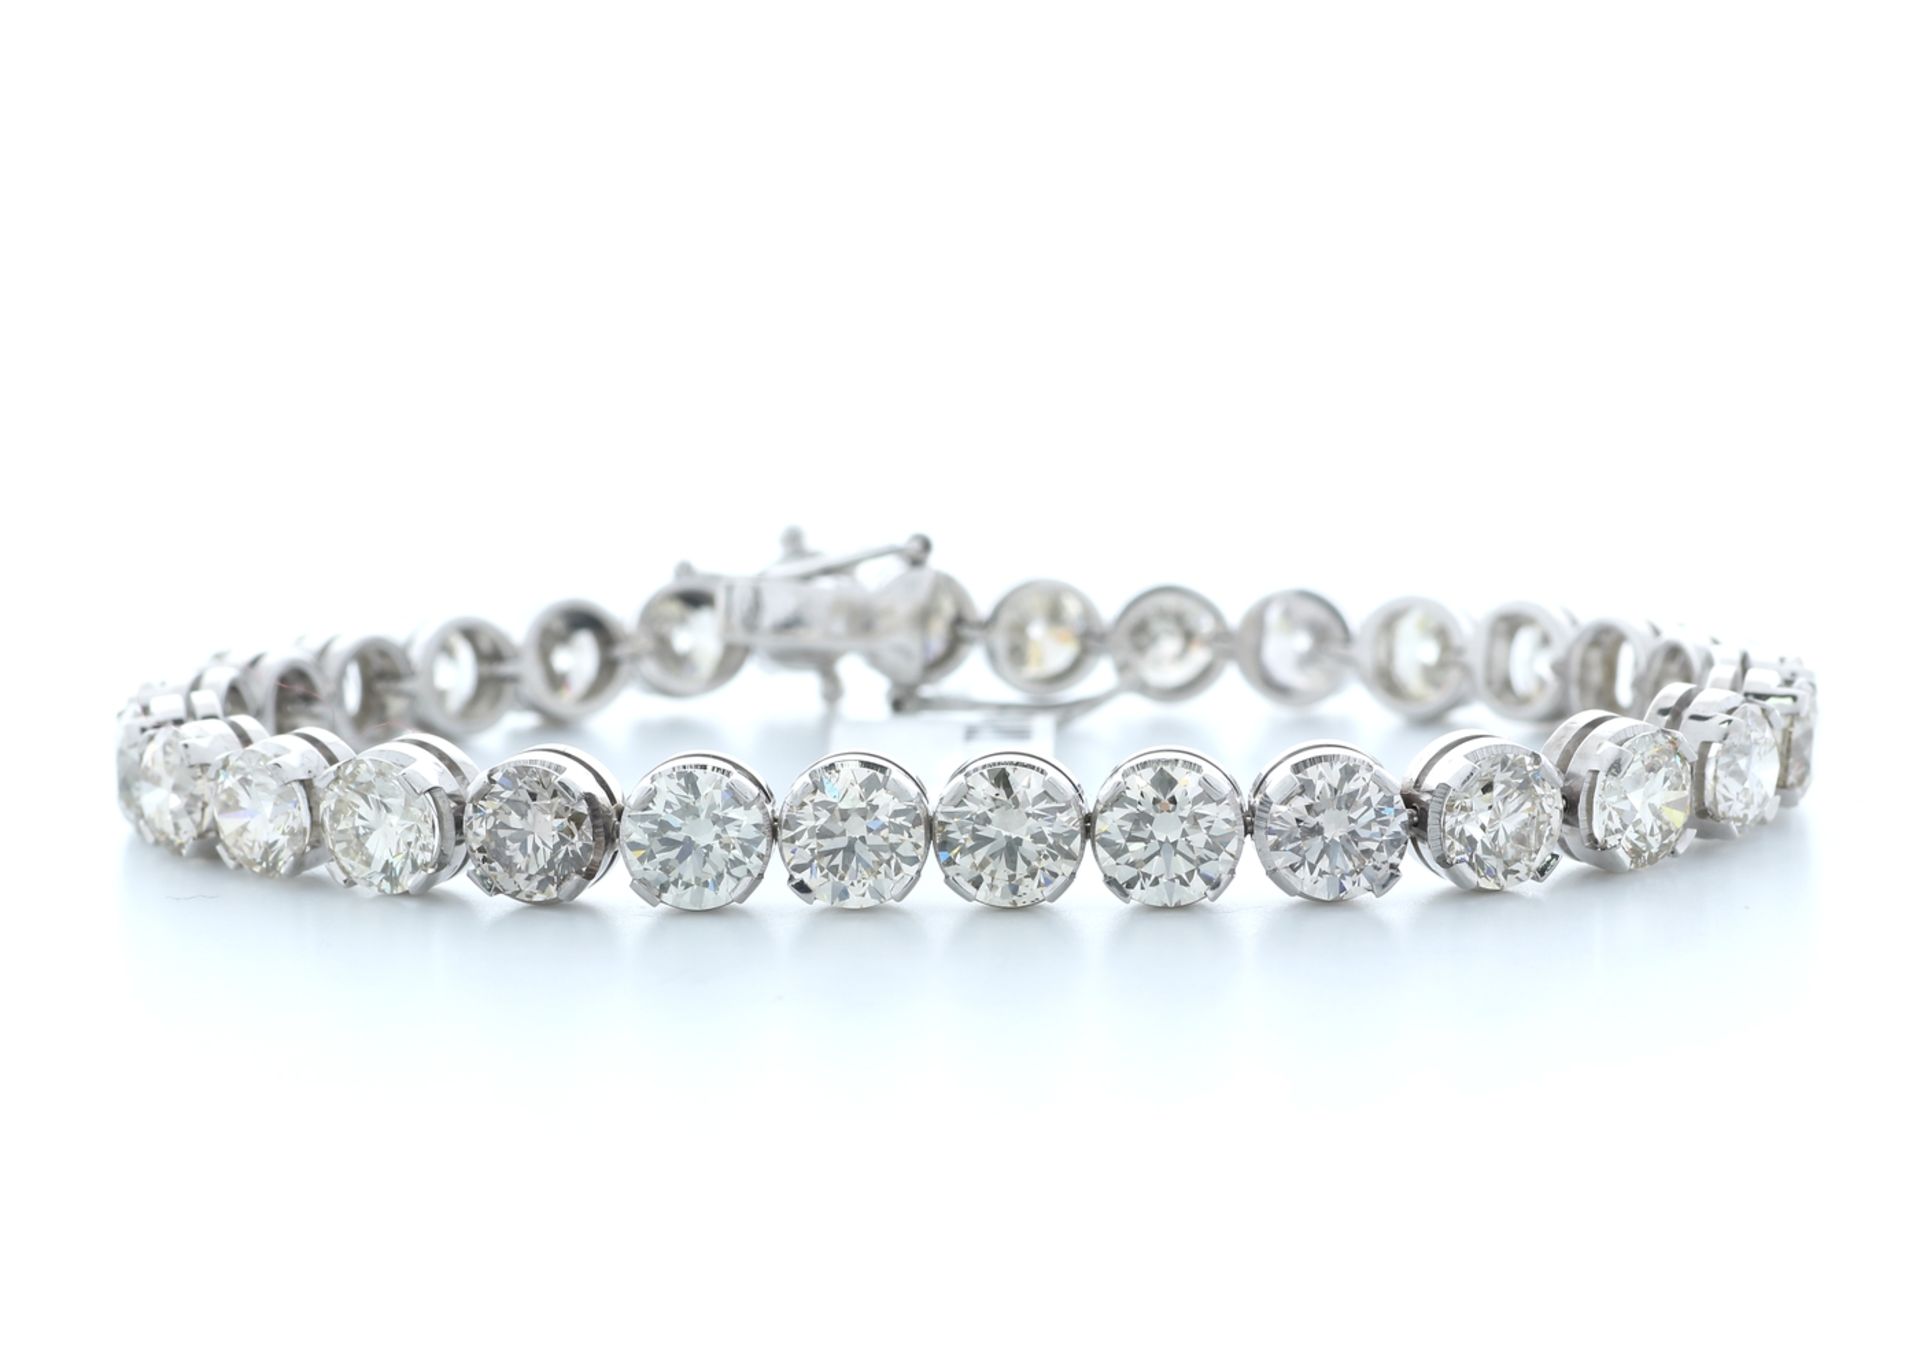 18ct White Gold Claw Set Diamond Tennis Bracelet 23.02 Carats Carats - Valued by IDI £165,000.00 -